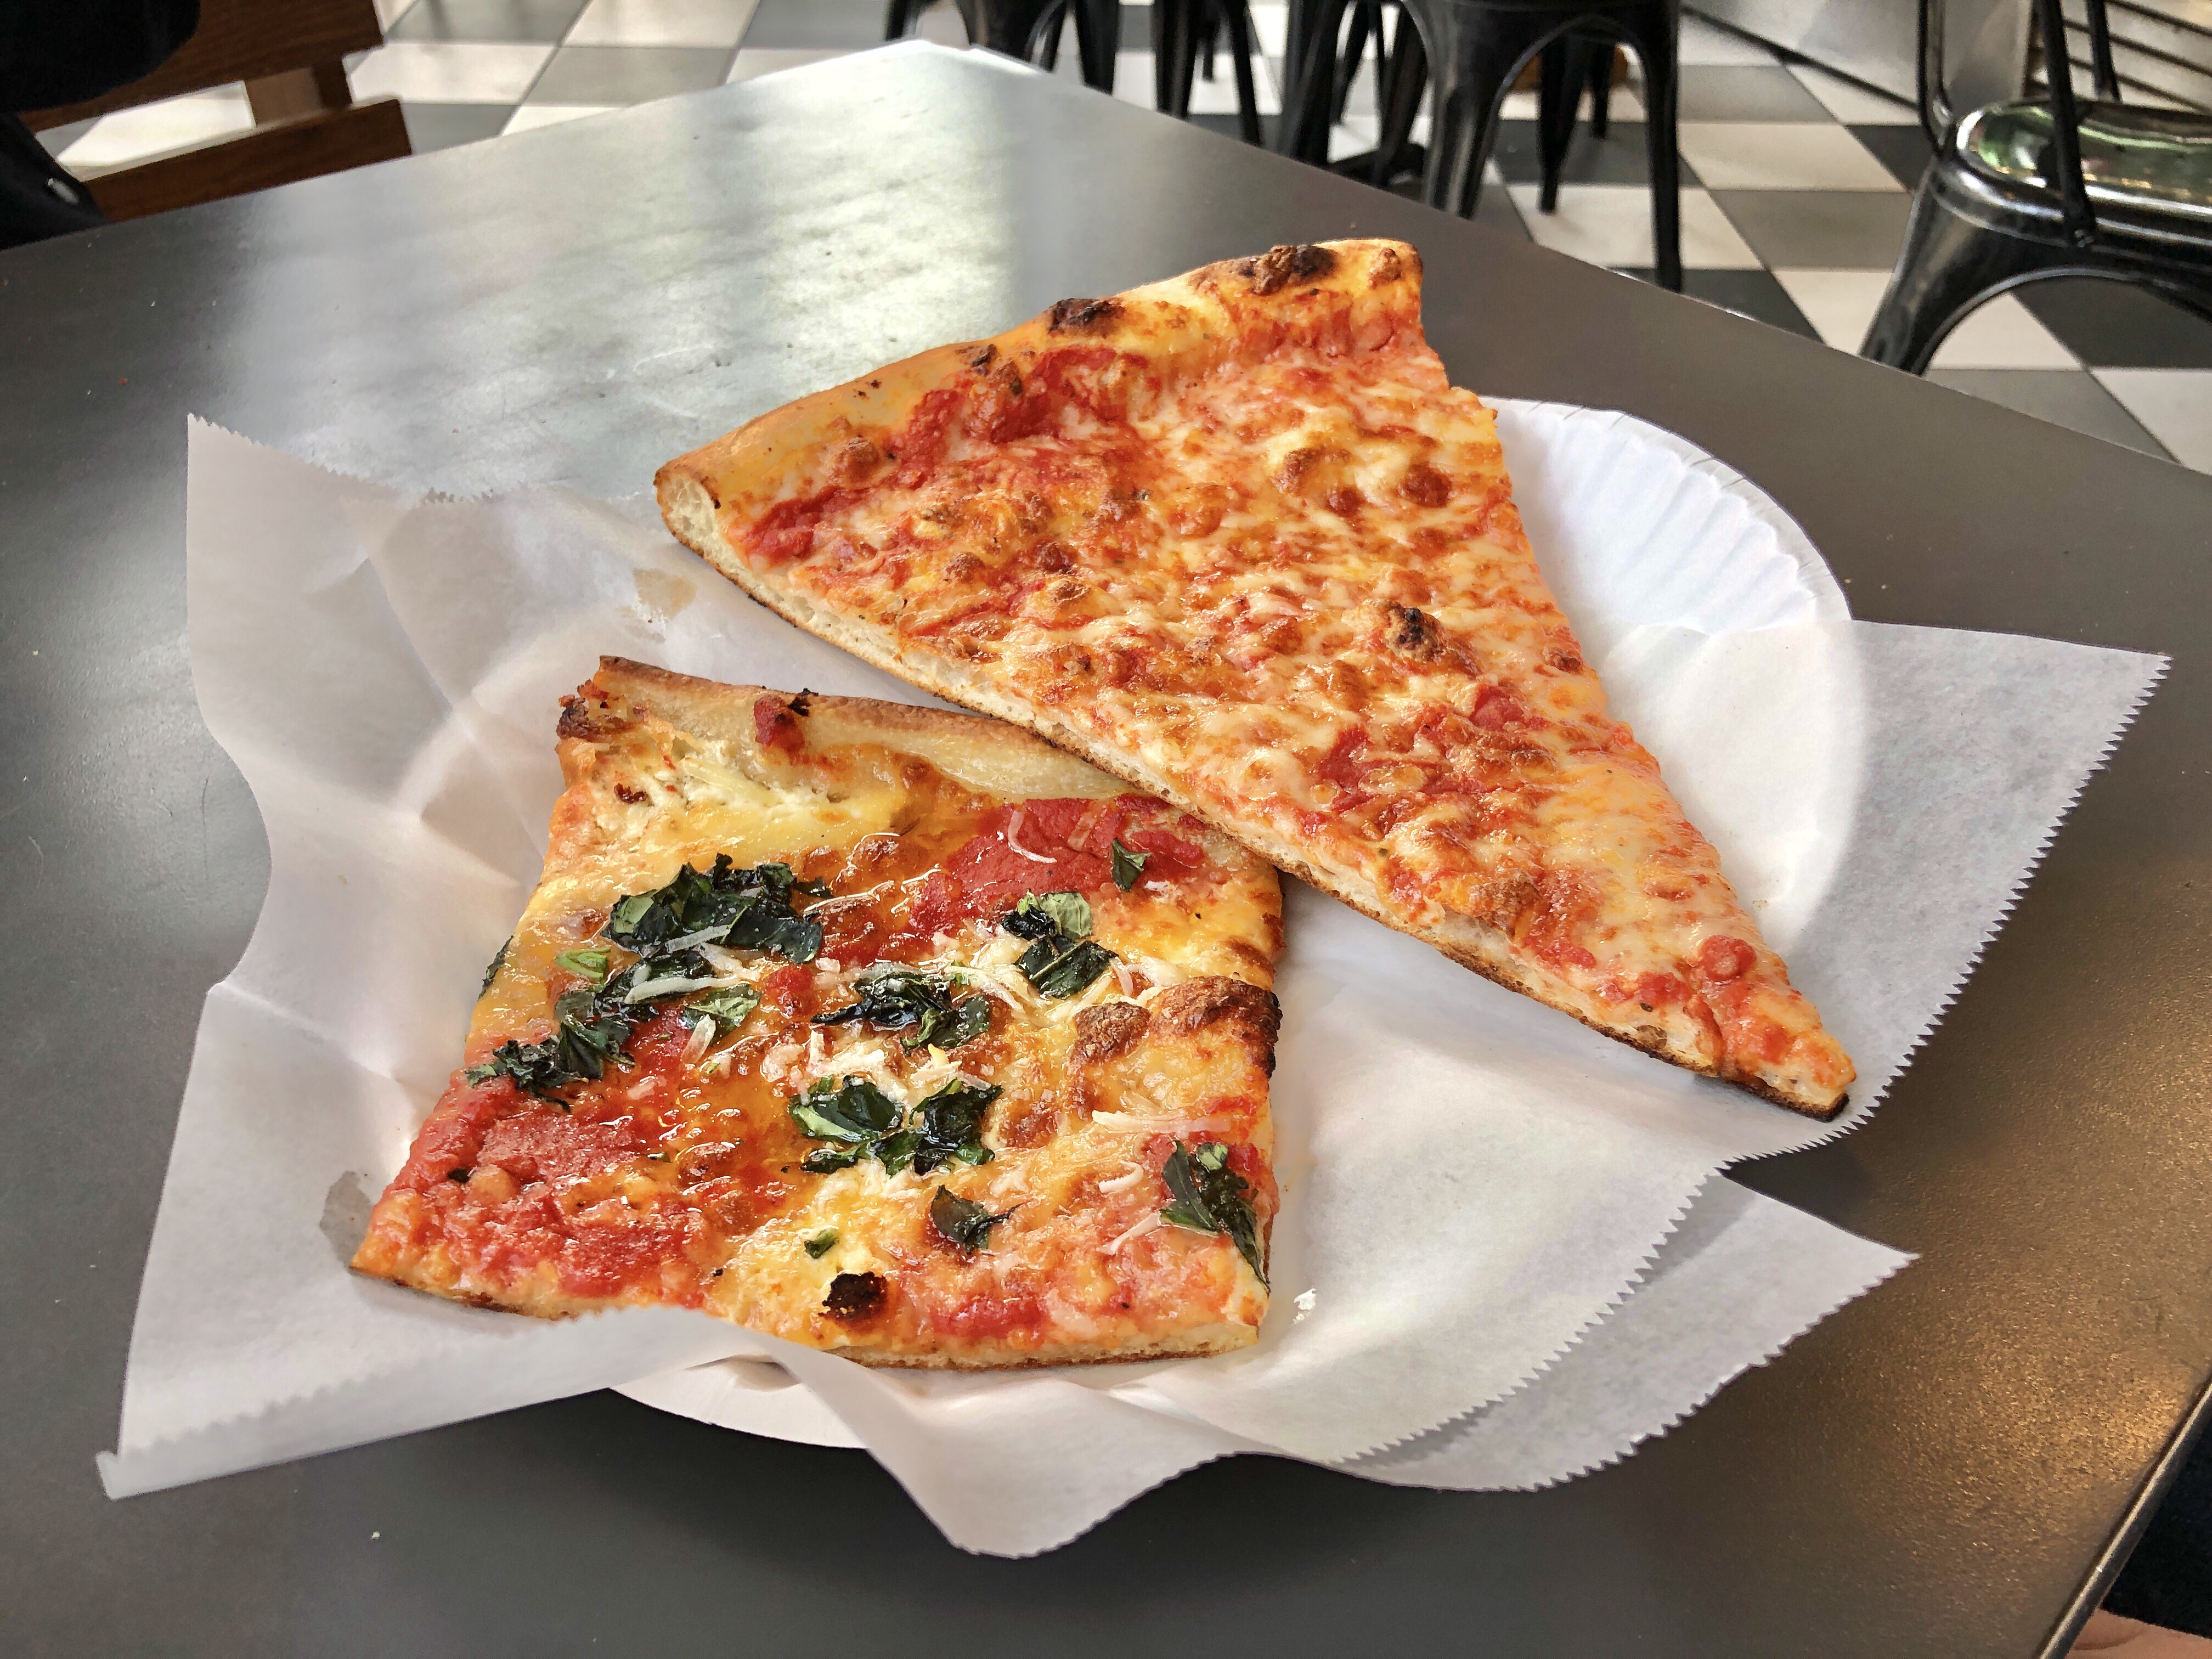 Williamsburg pizza slice from our New York Pizza tour